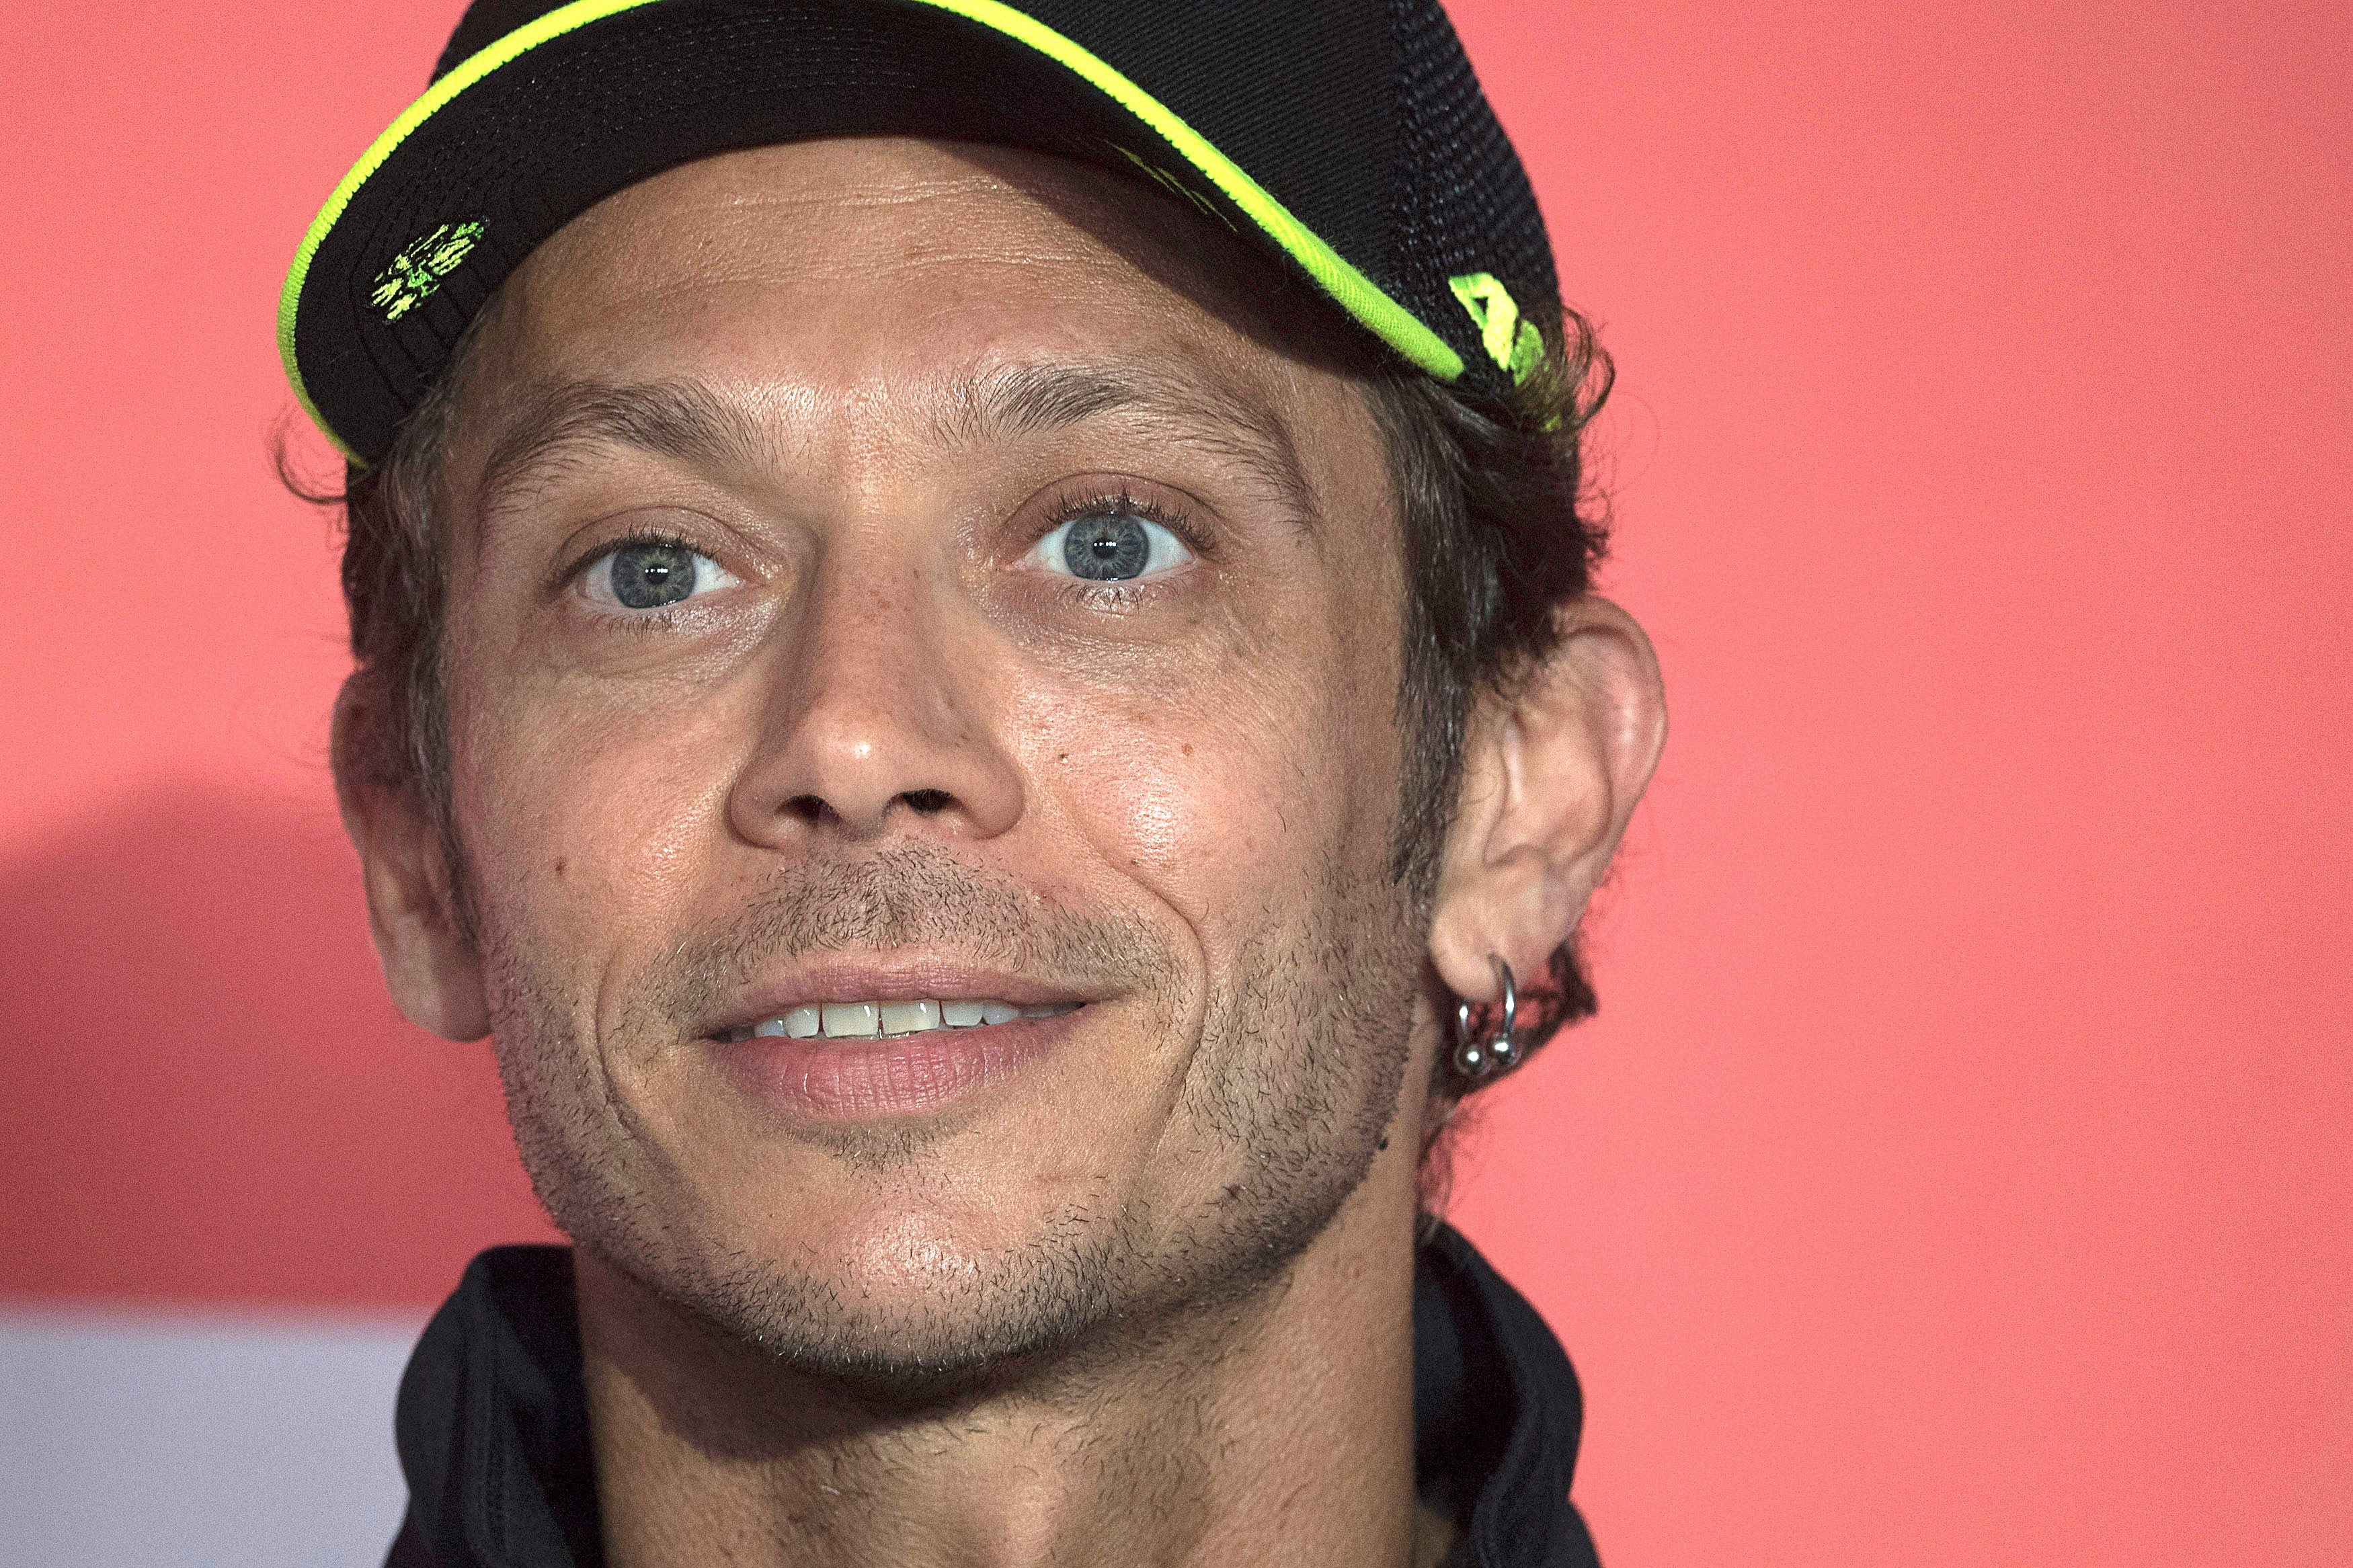 Grand Prix bikes of Valentino Rossi that defined his career